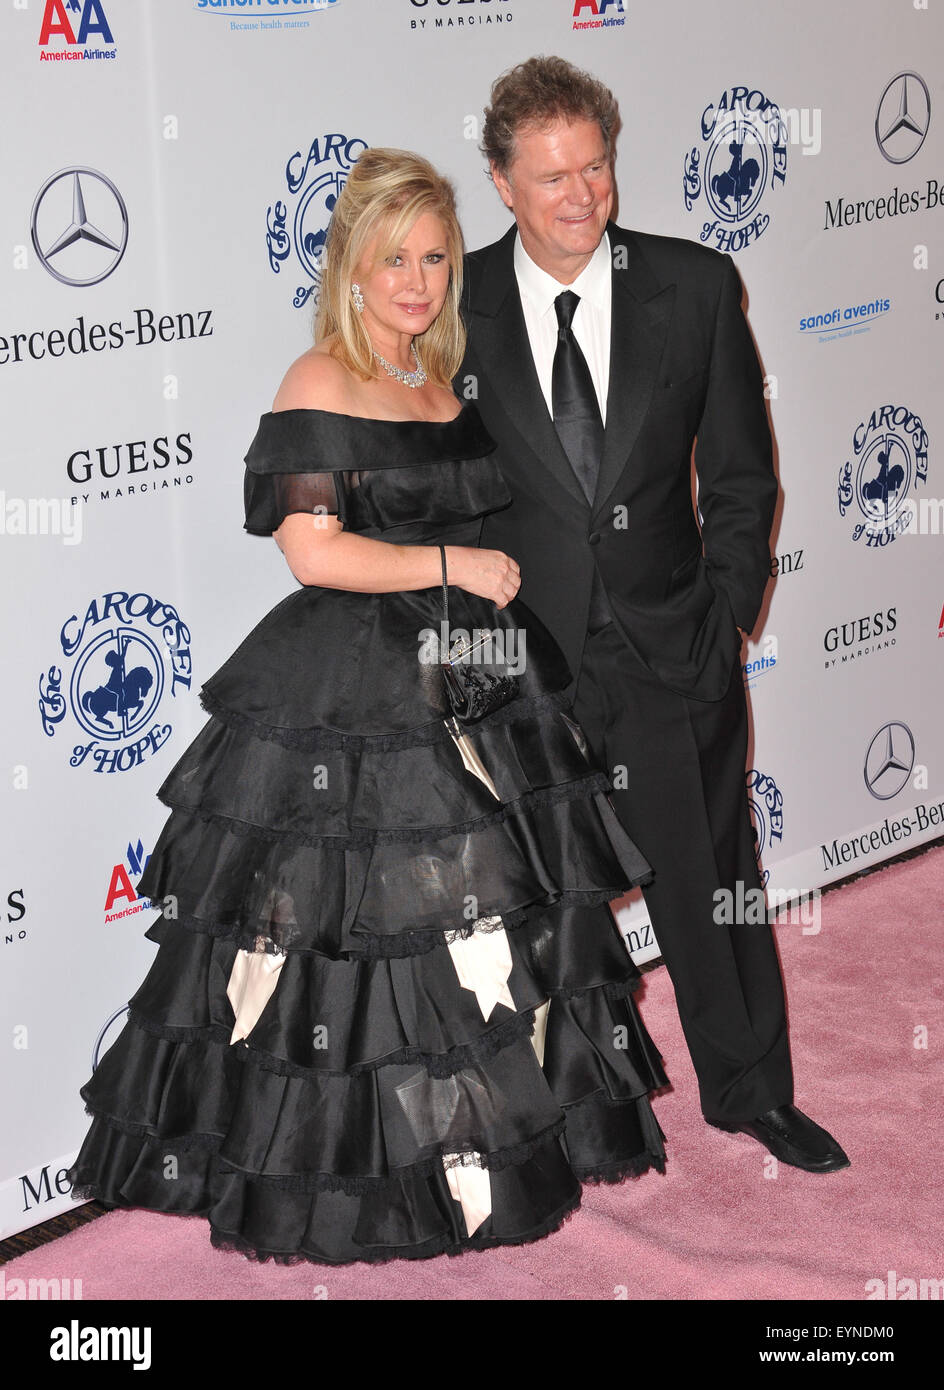 LOS ANGELES, CA - OCTOBER 23, 2010: Kathy Hilton & husband Rick Hilton at the 32nd Anniversary Carousel of Hope Ball at the Beverly Hilton Hotel. Stock Photo